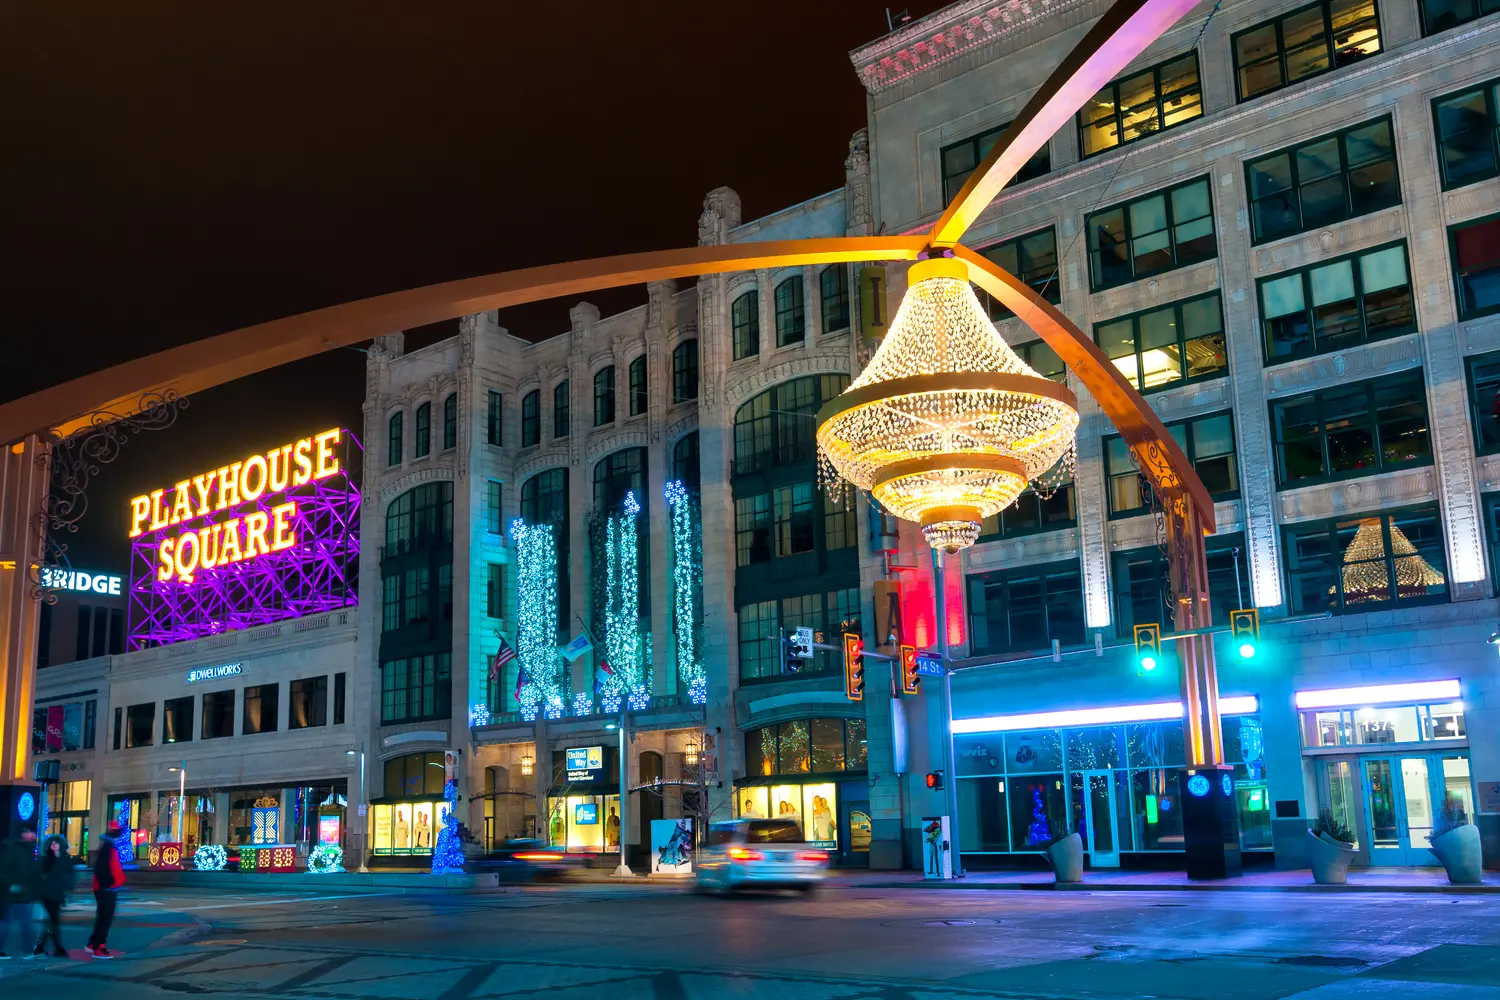 Playhouse Square intersection in Cleveland, Ohio